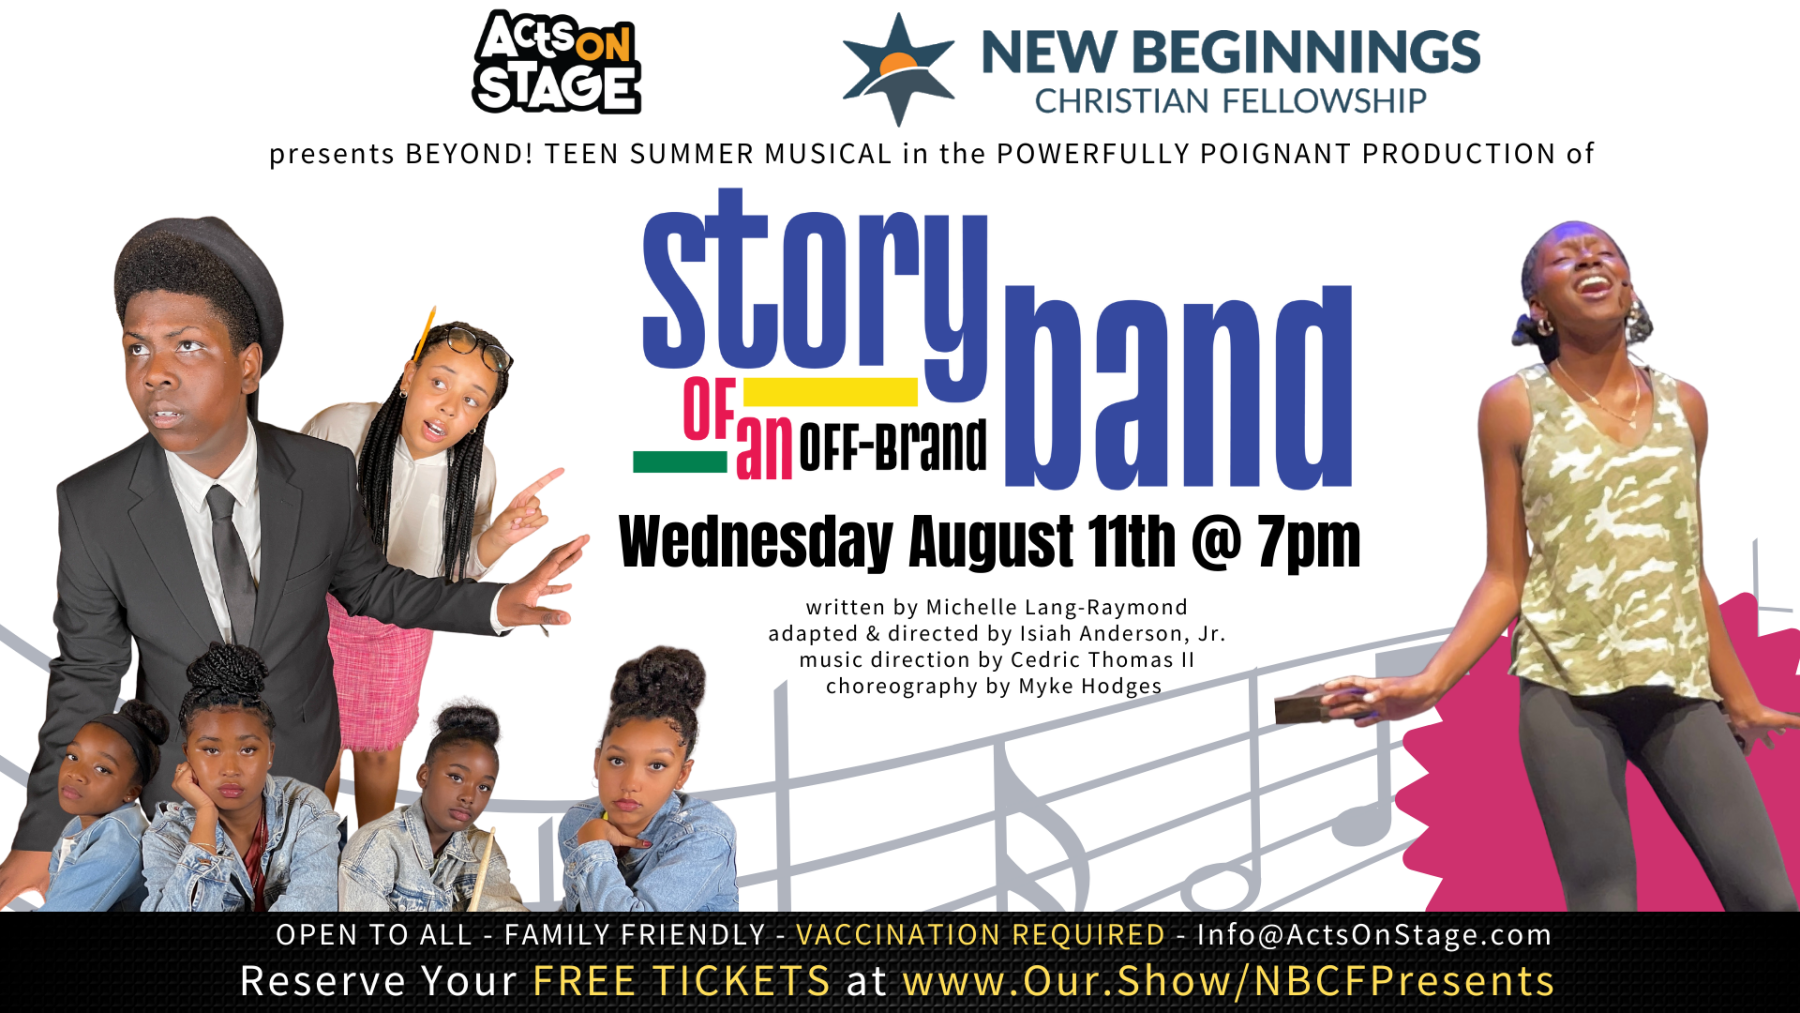 NBCF Presents "Teen Summer Musical production - Story of an off-brand Band"